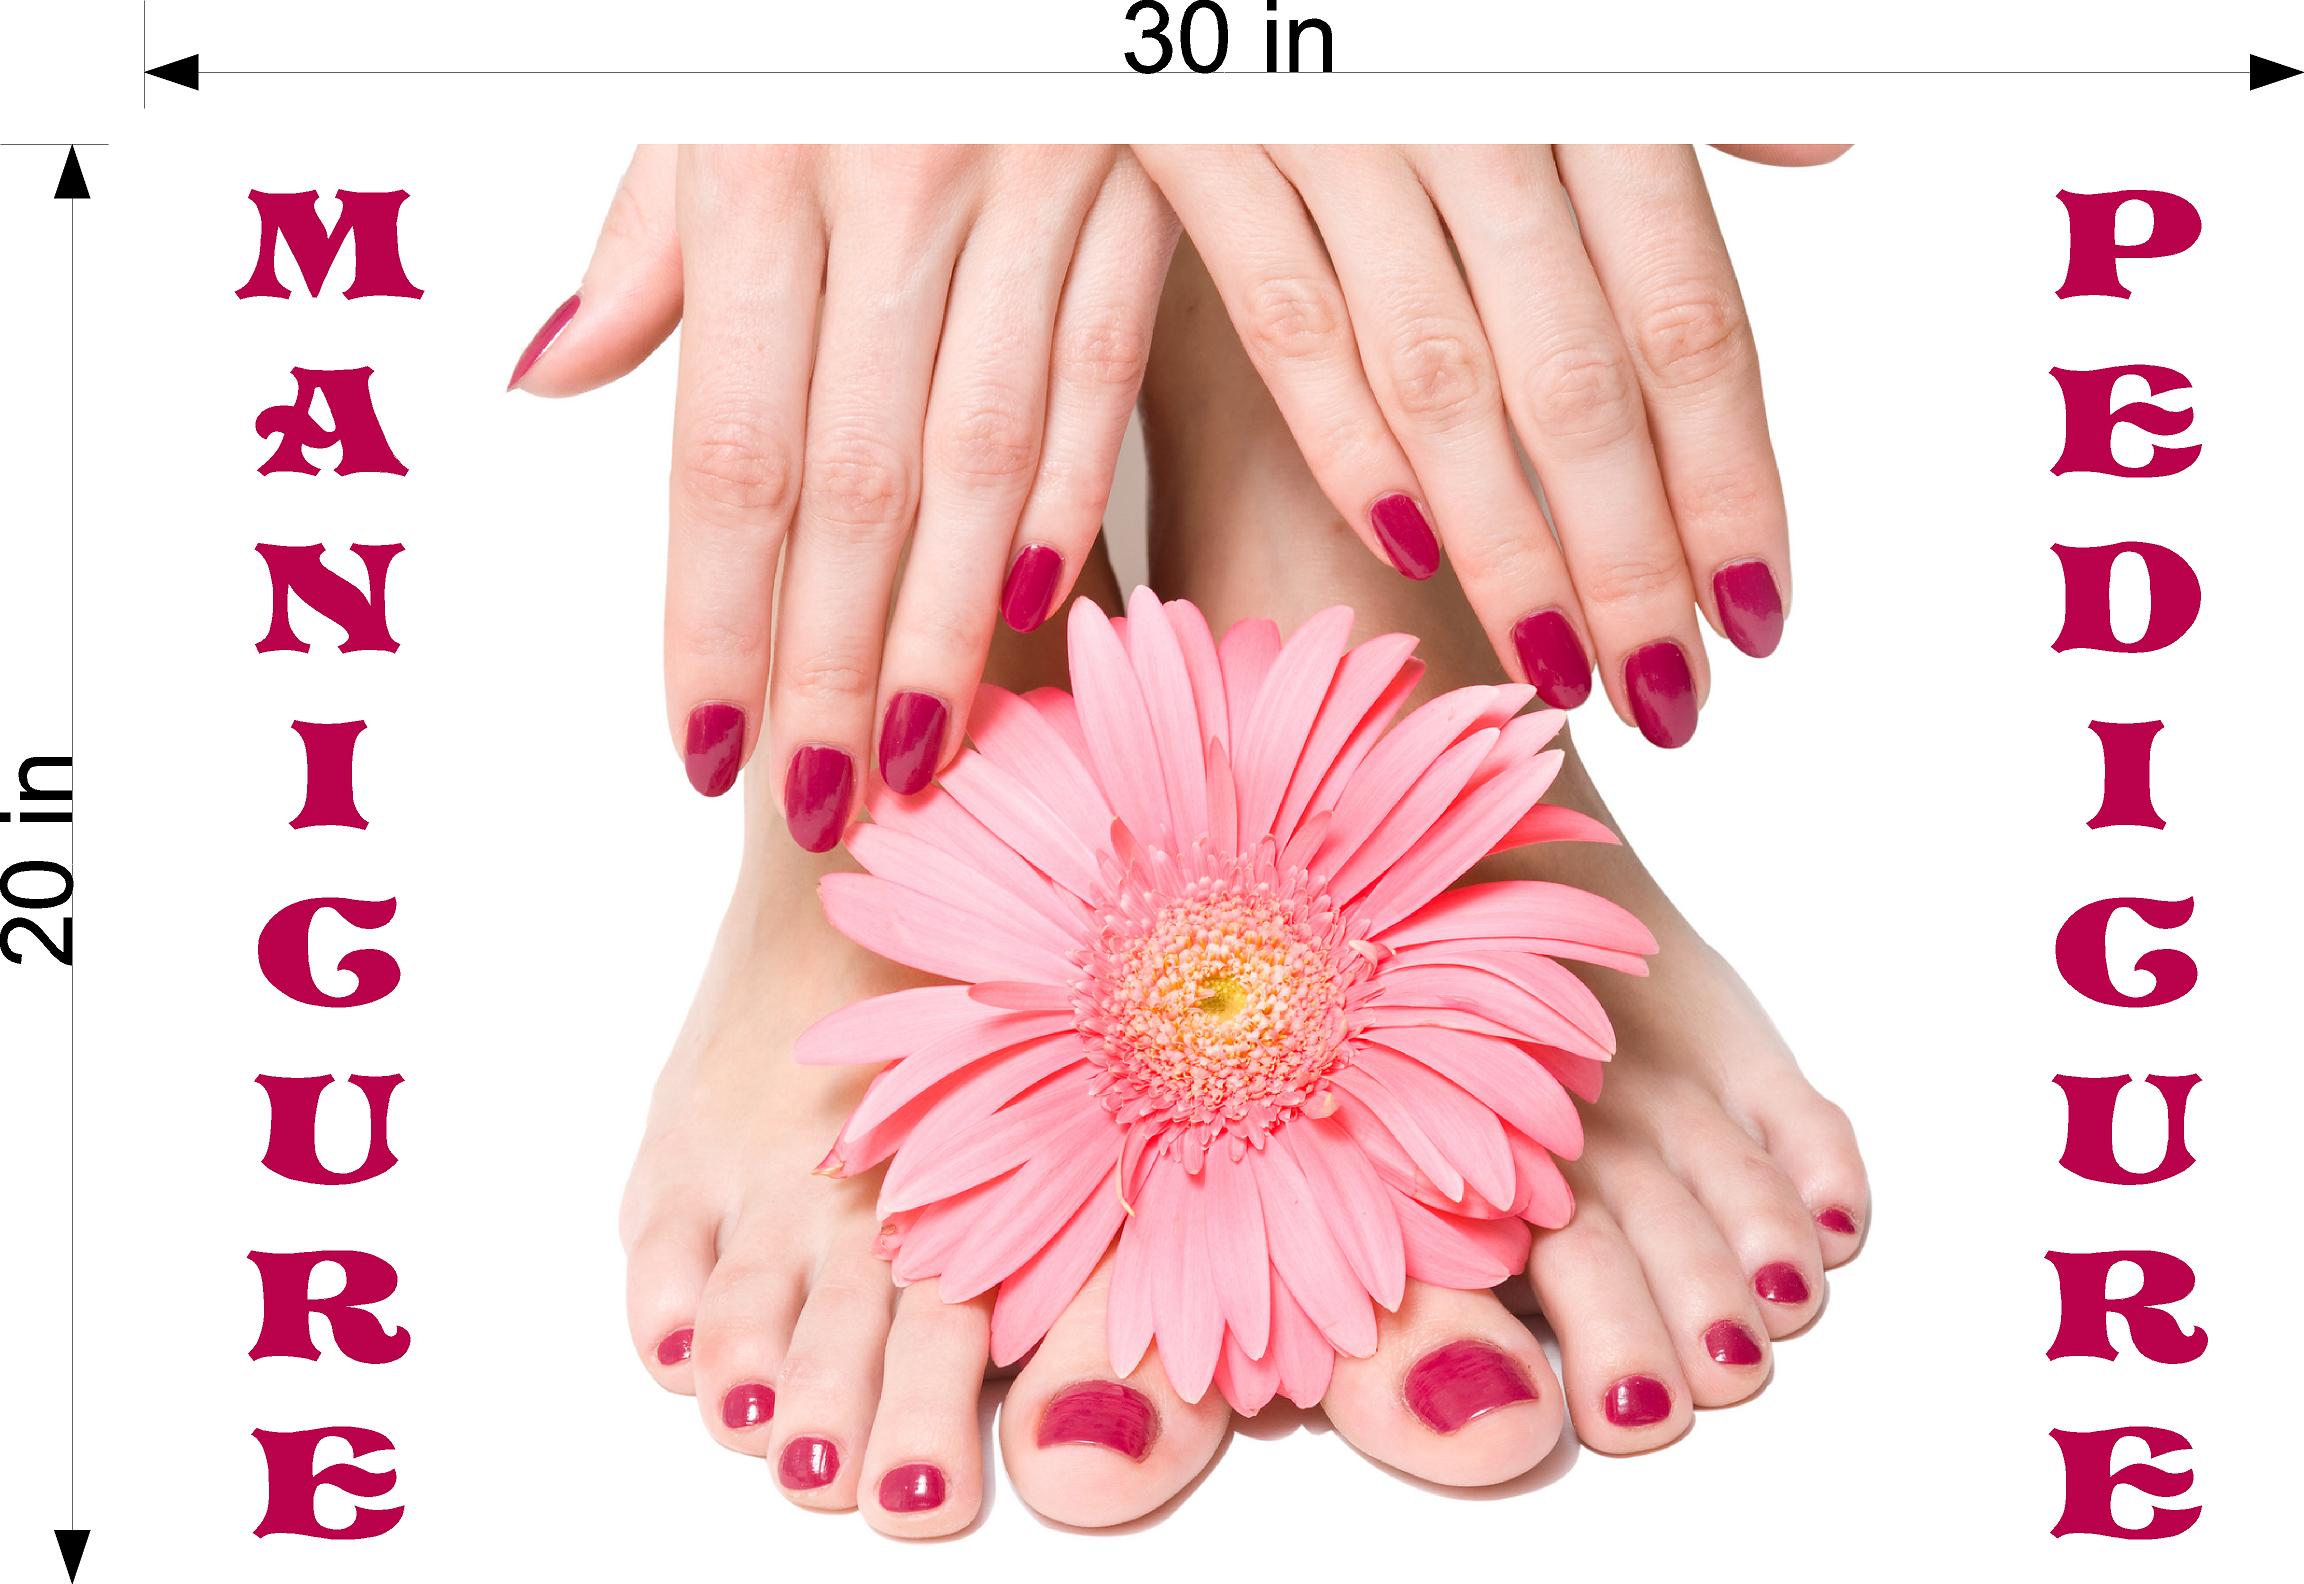 Pedicure & Manicure 07 Wallpaper Poster Decal with Adhesive Backing Wall Sticker Decor Indoors Interior Sign Horizontal